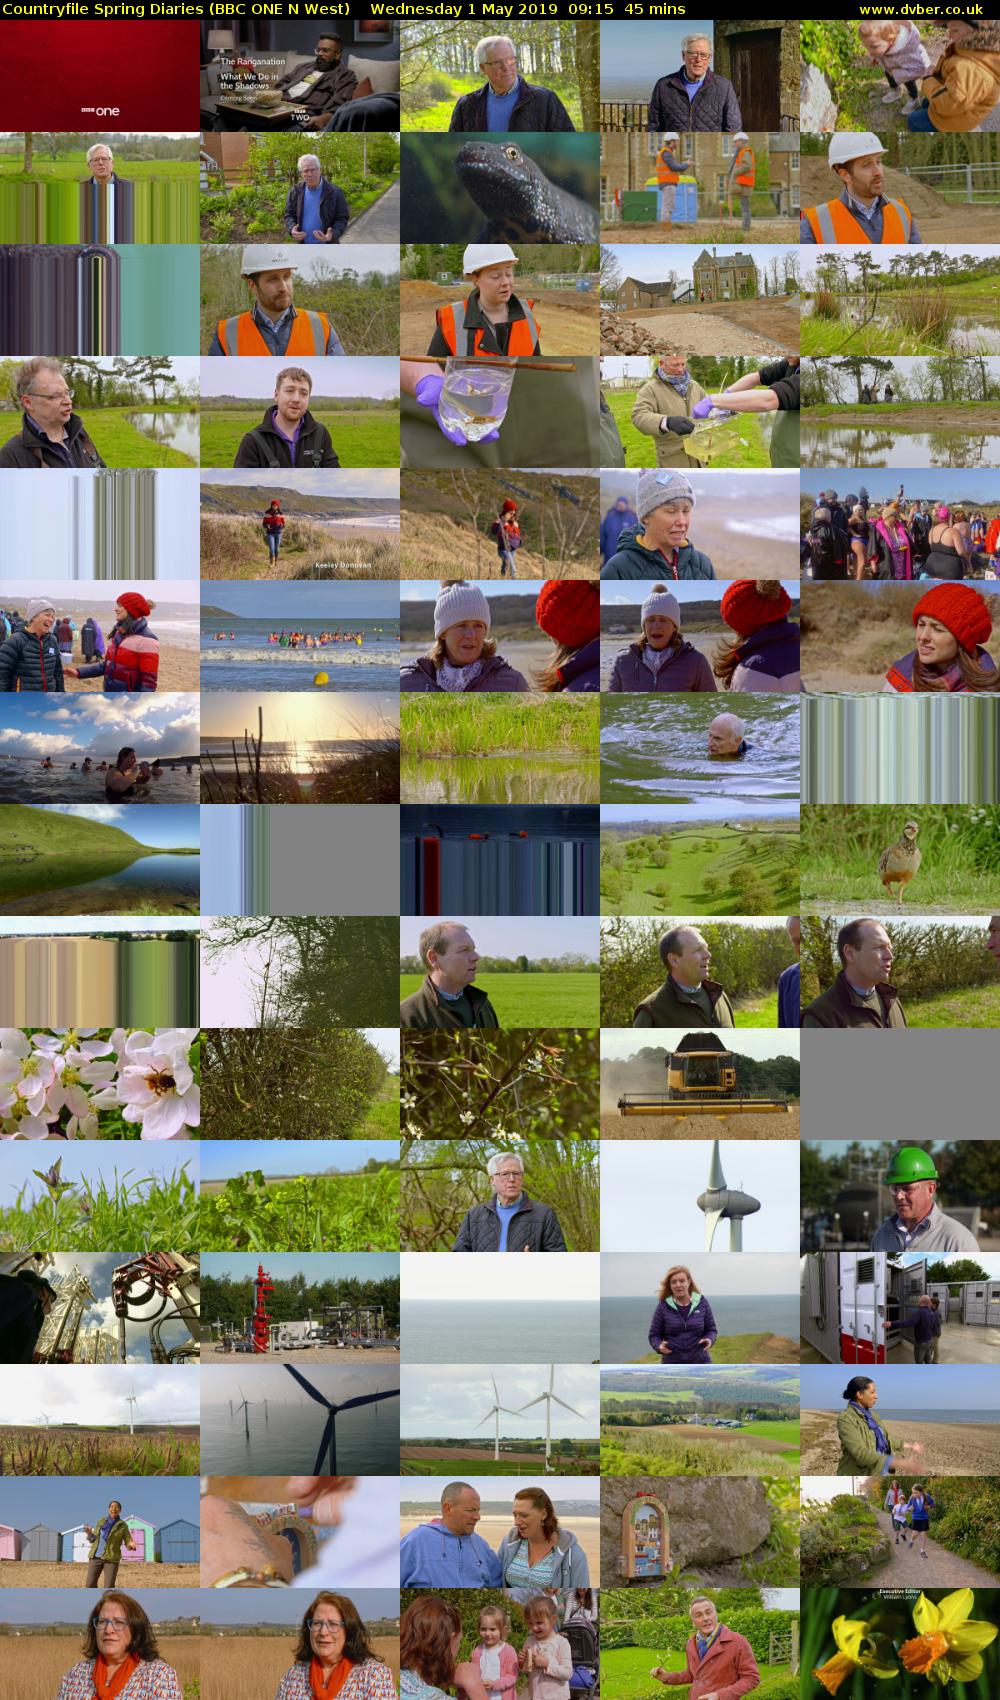 Countryfile Spring Diaries (BBC ONE N West) Wednesday 1 May 2019 09:15 - 10:00